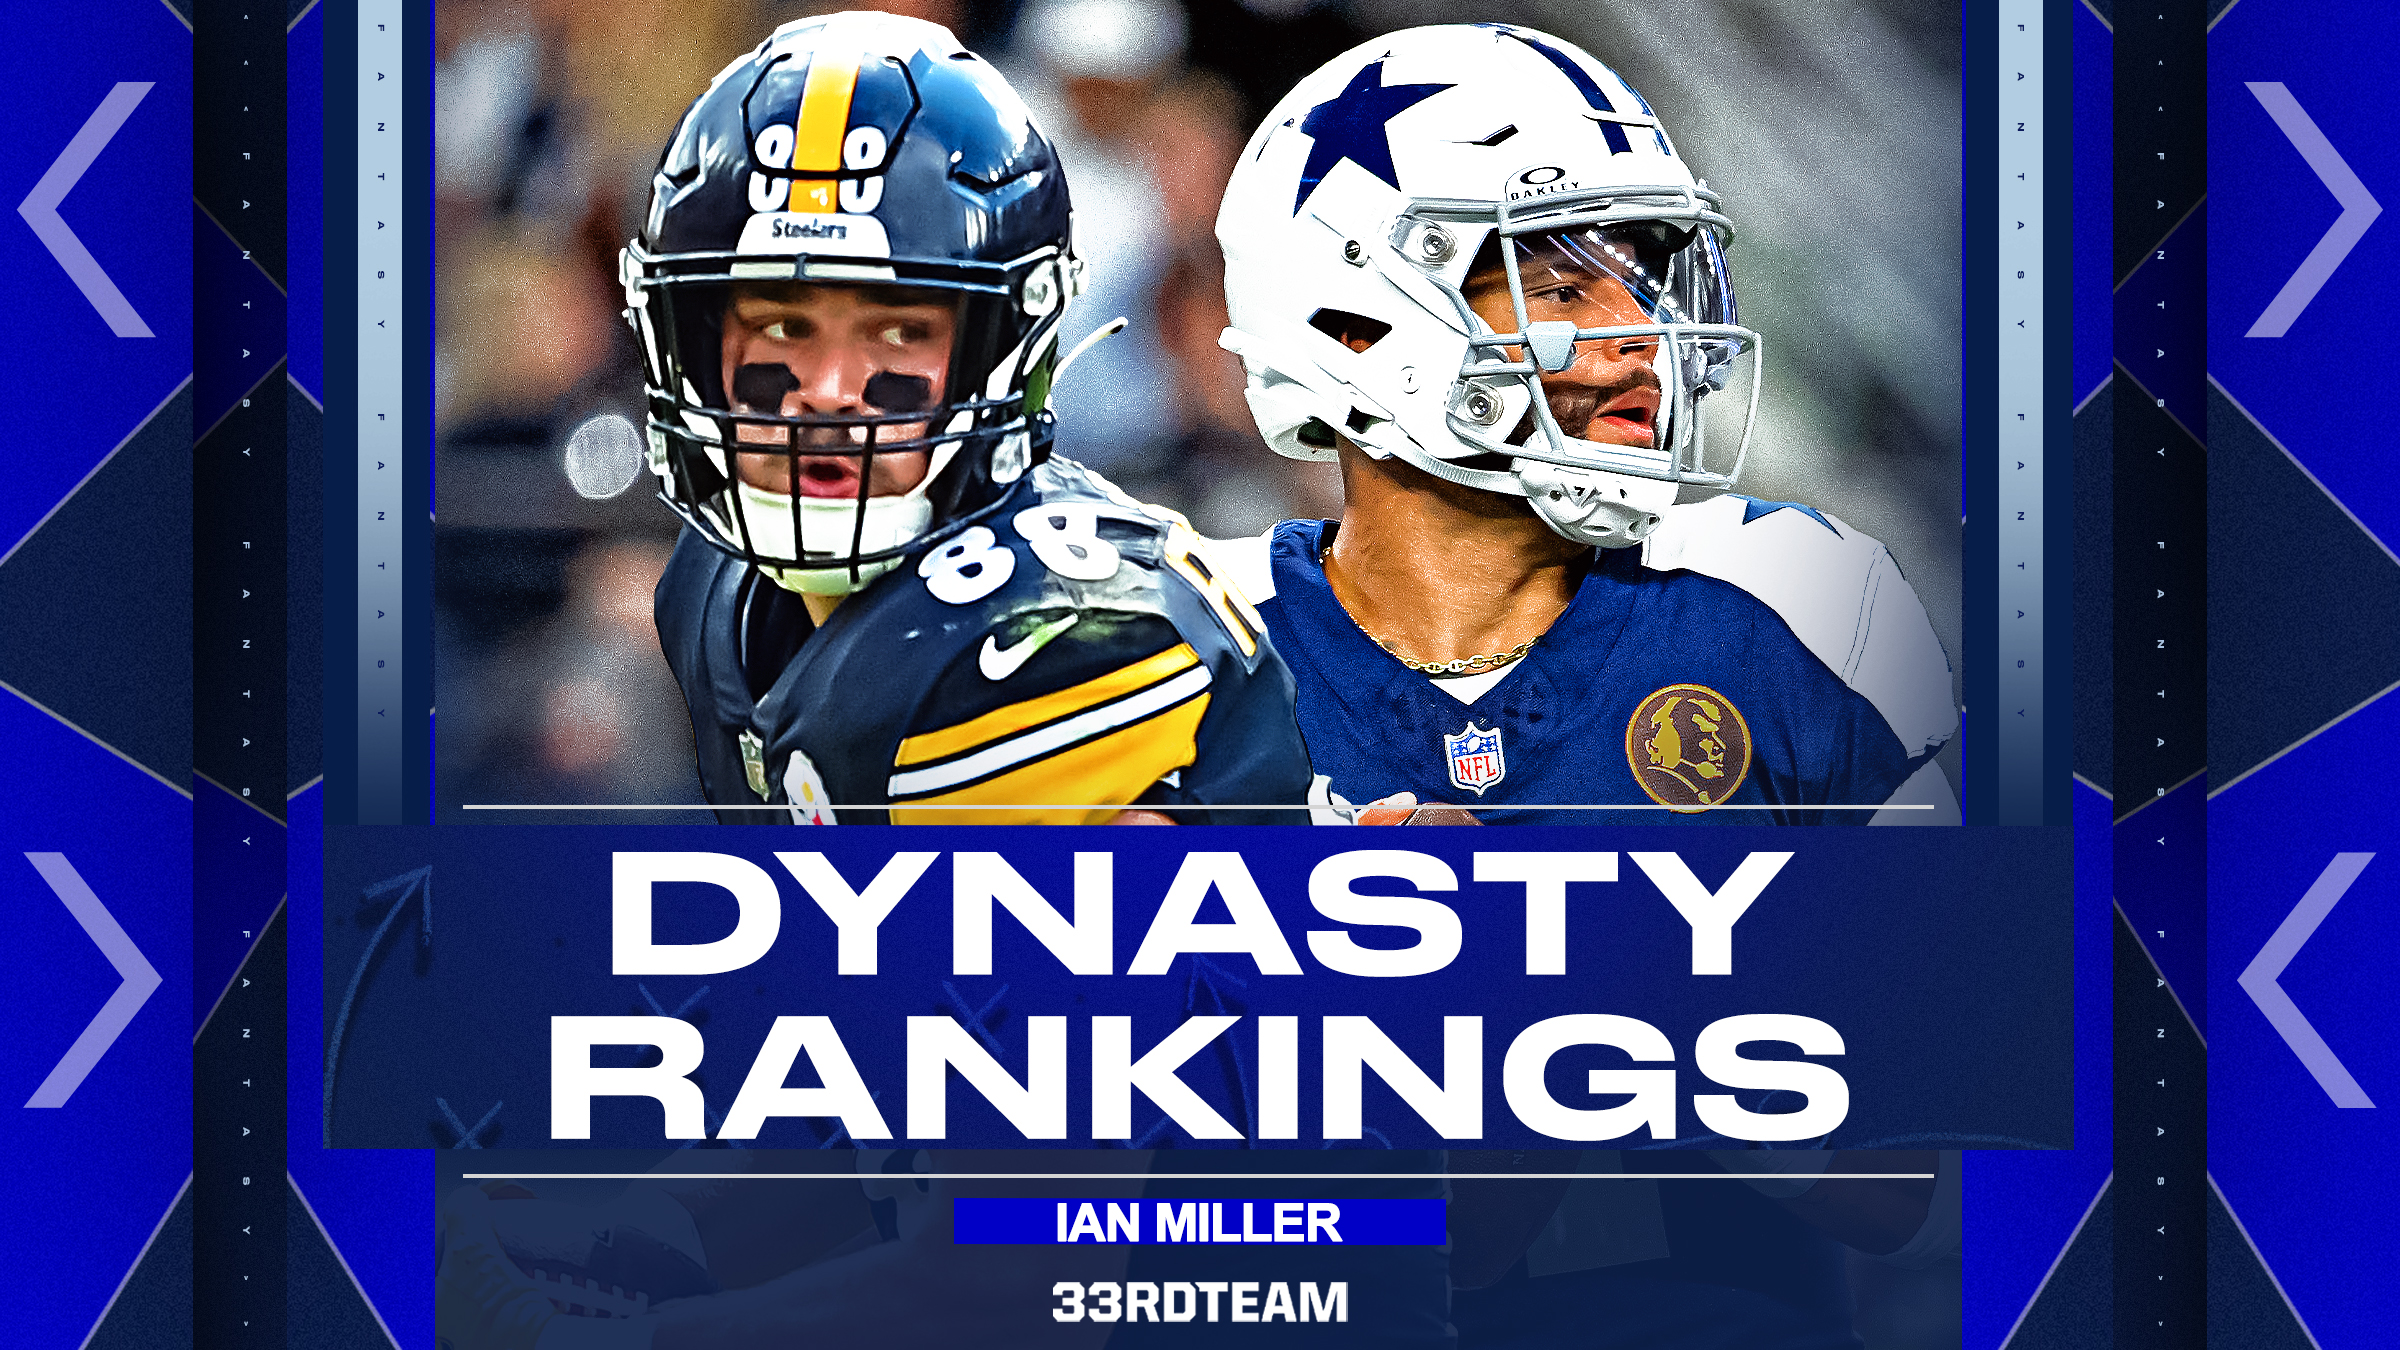 Images of Pat Freiermuth and Dak Prescott with text that reads "Dynasty Rankings/Ian Miller/the 33rd Team"